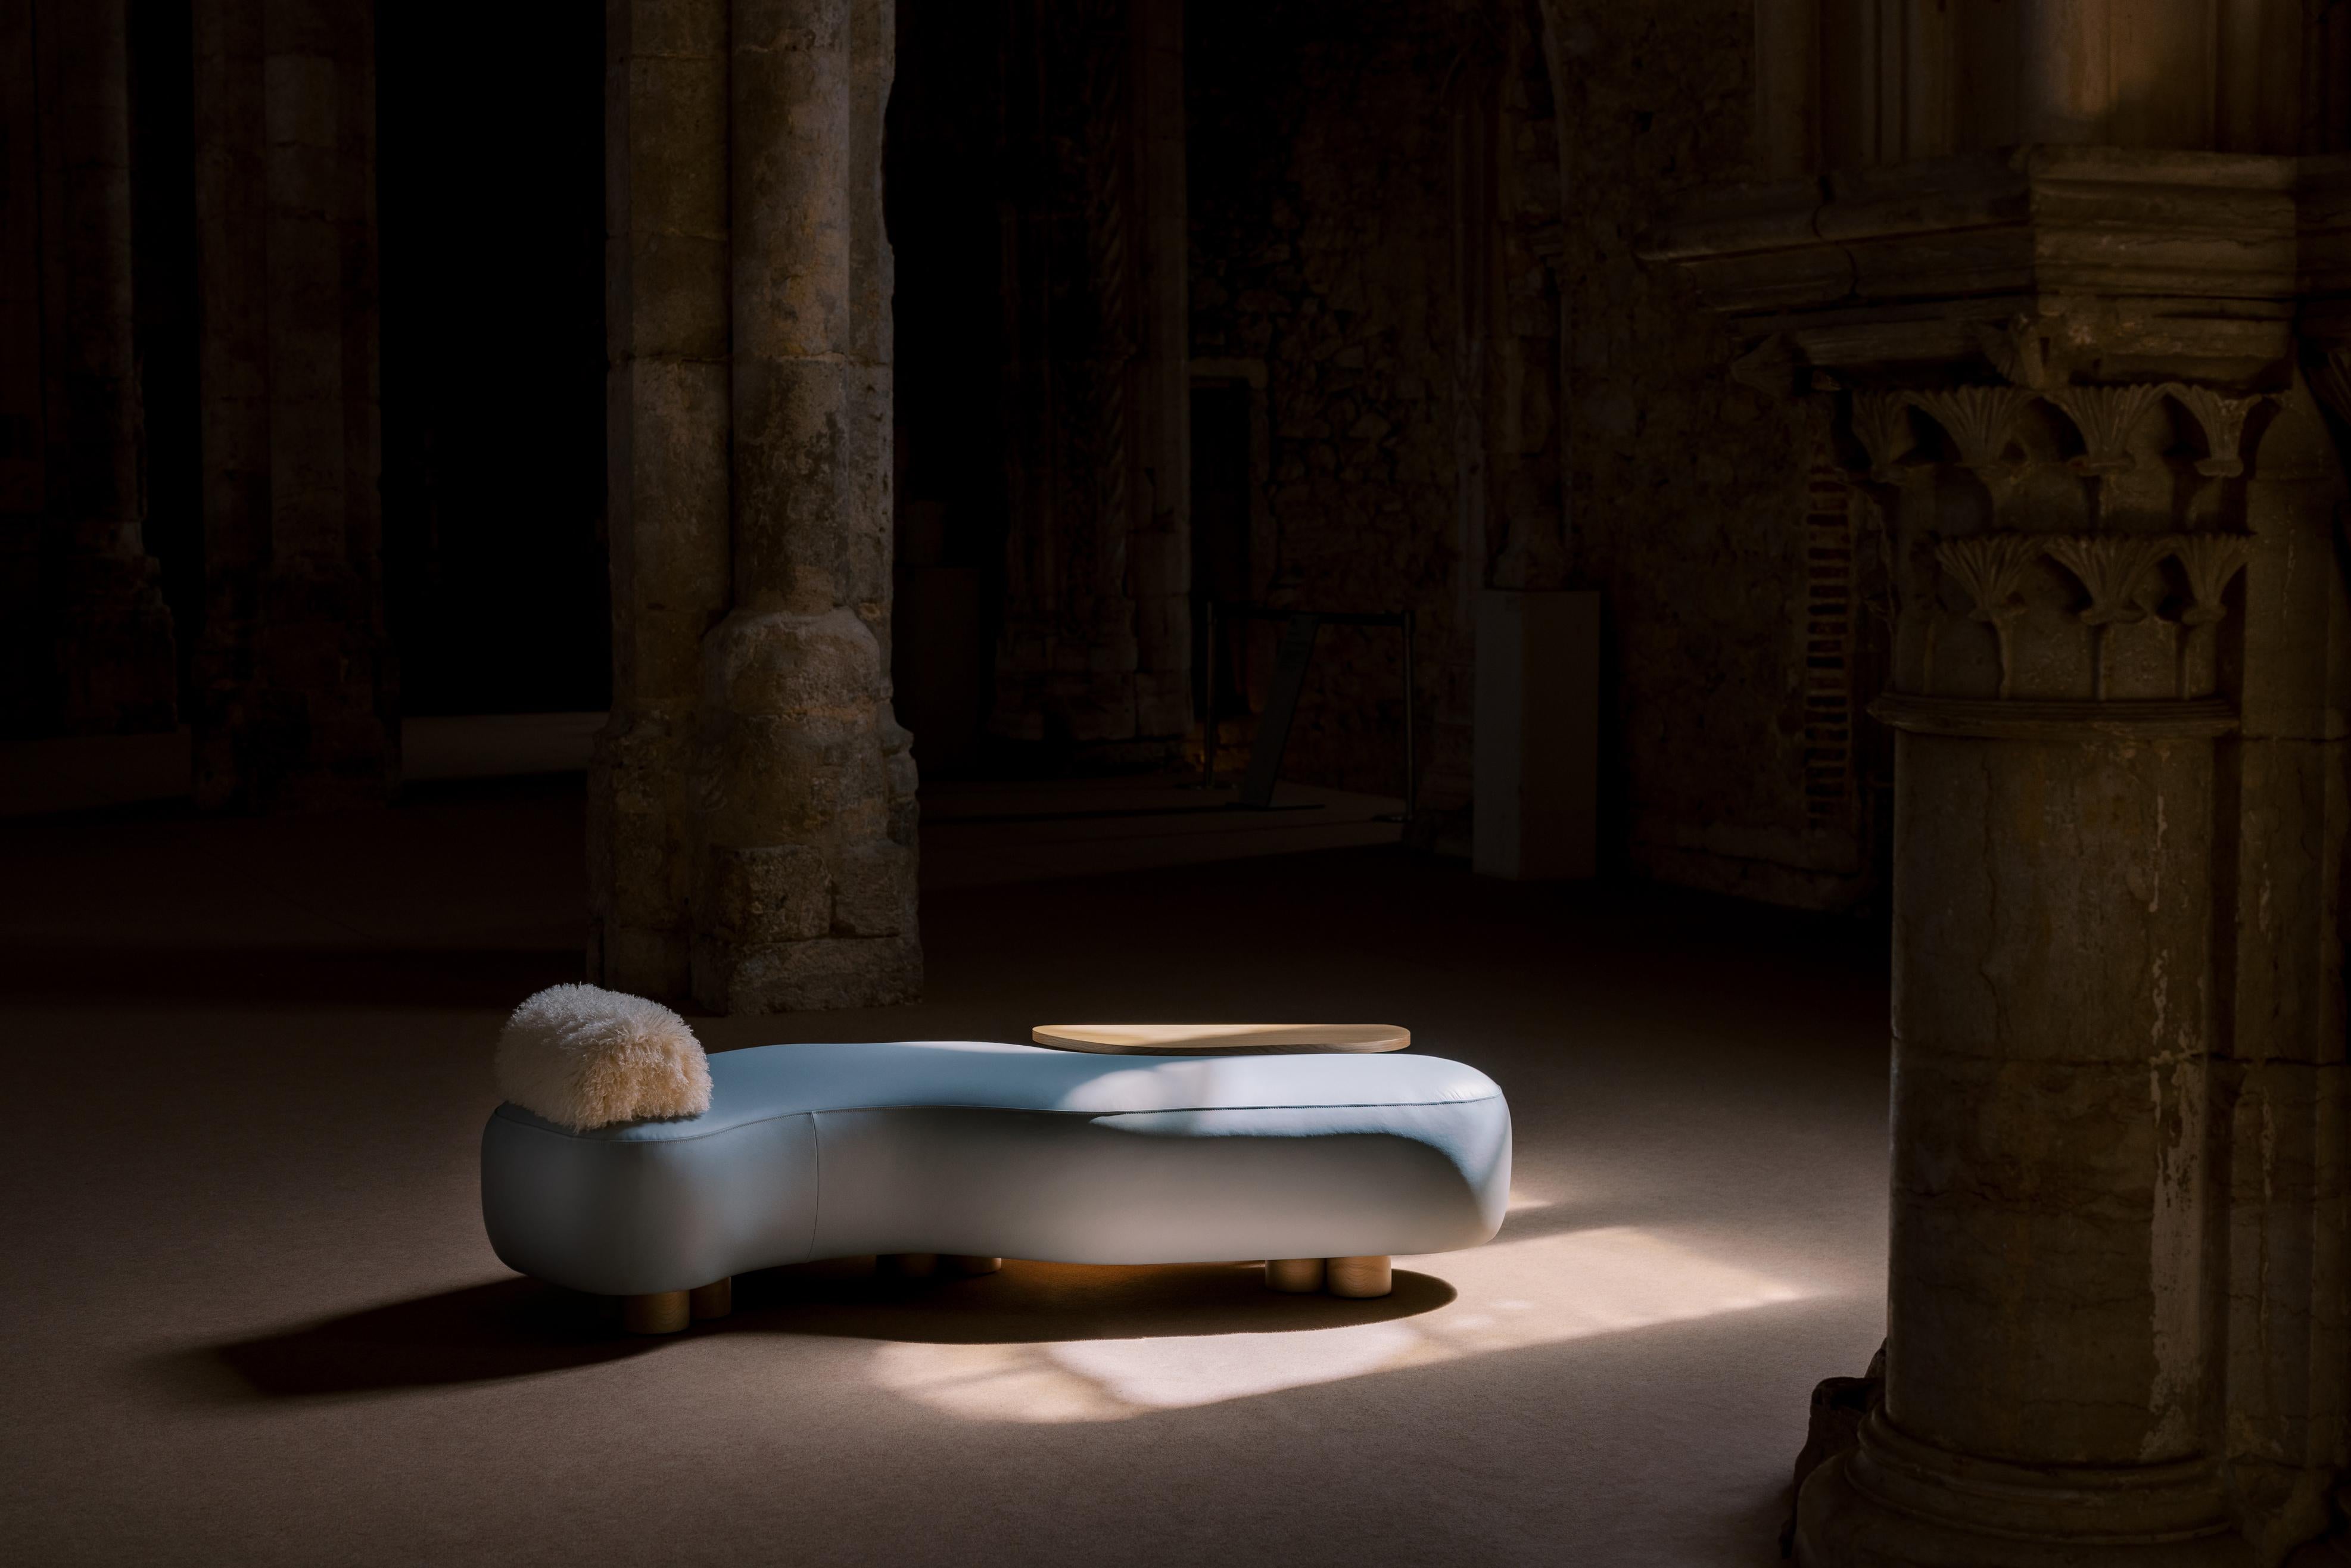 Contemporary Modern Minho Day Bed, Light Blue Leather, Handmade in Portugal by Greenapple For Sale